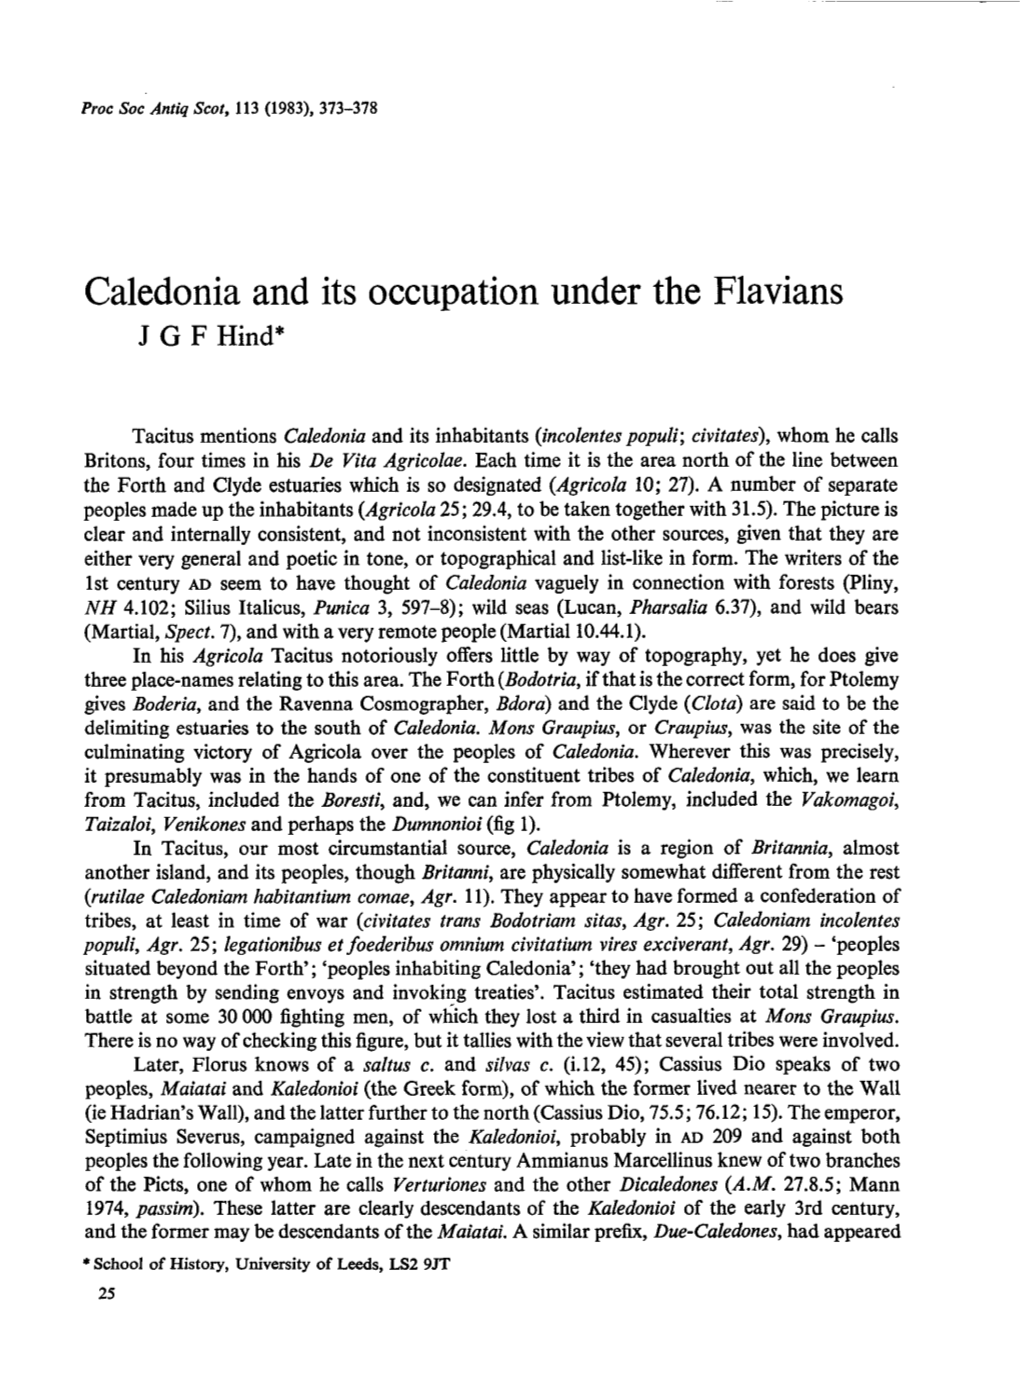 Caledonia and Its Occupation Under the Flavians J G F Hind*